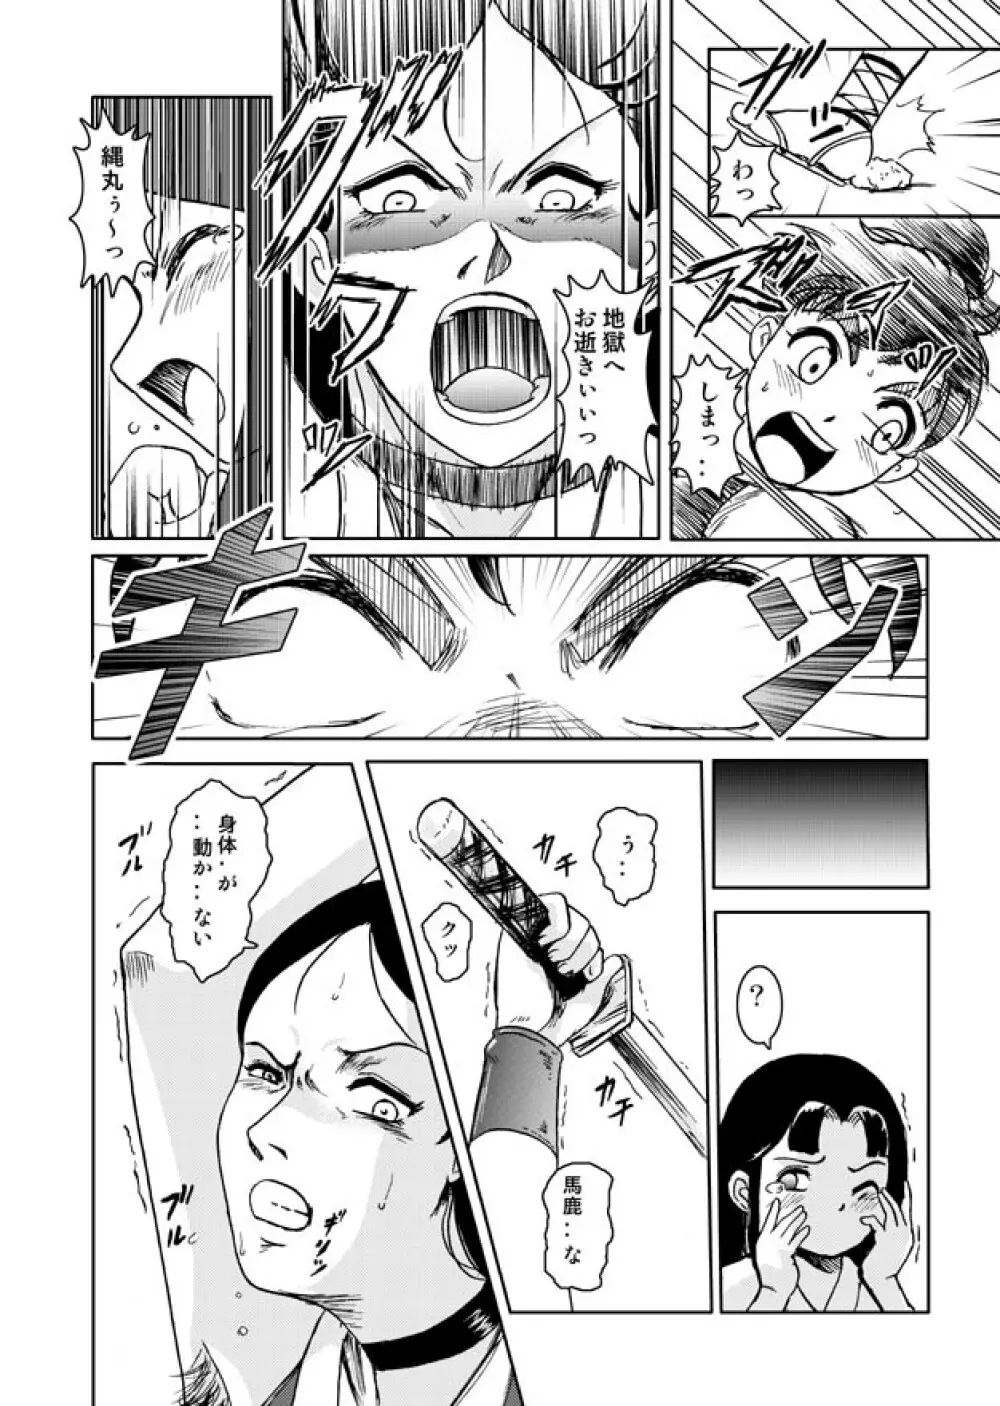 Same-themed manga about kid fighting female ninjas from japanese imageboard. Page.9